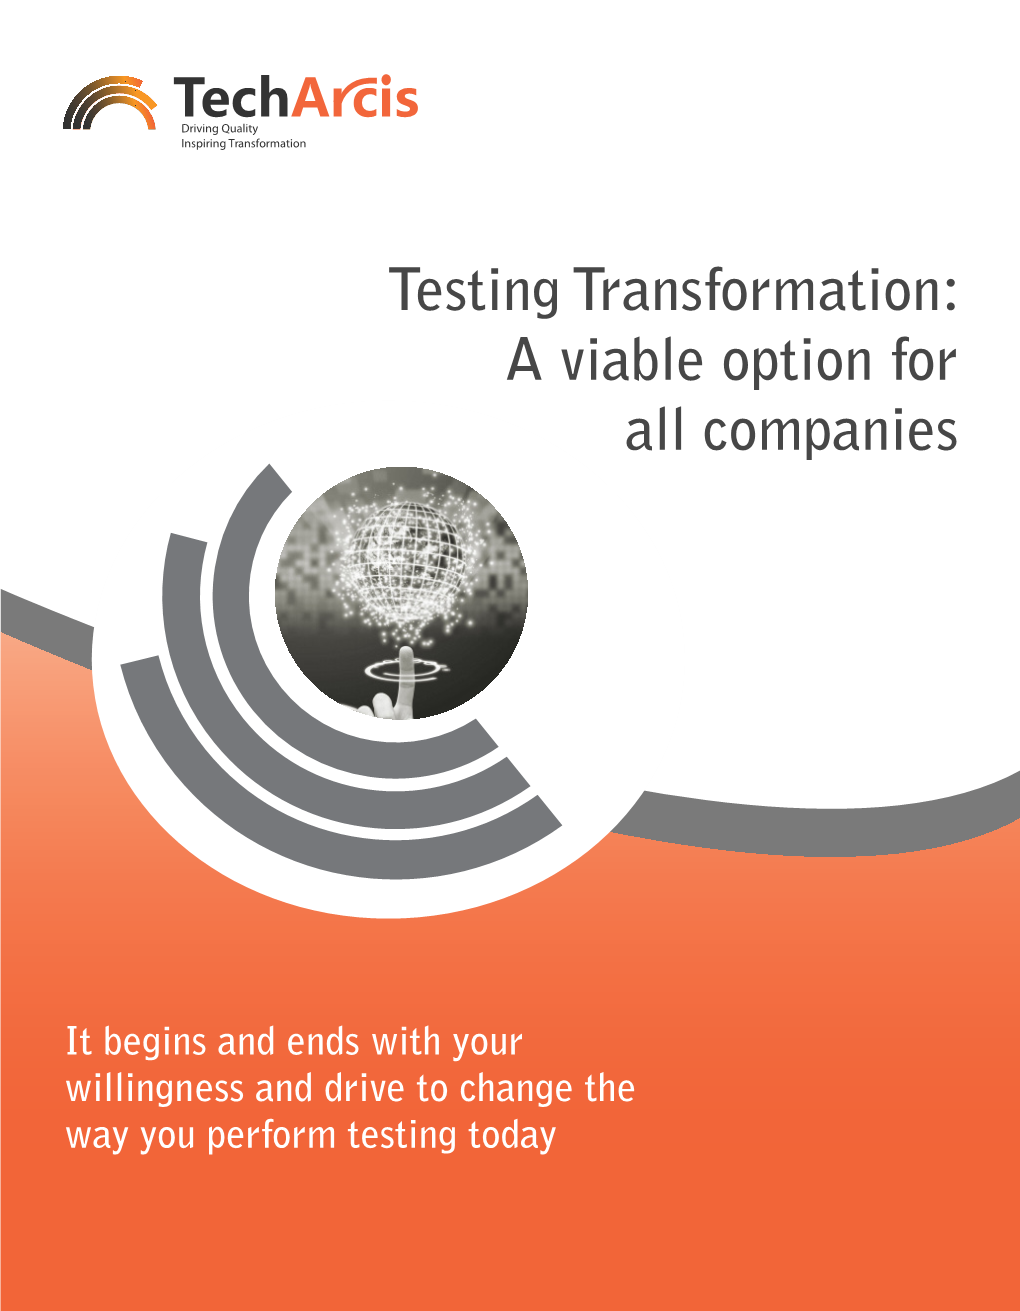 Testing Transformation: a Viable Option for All Companies